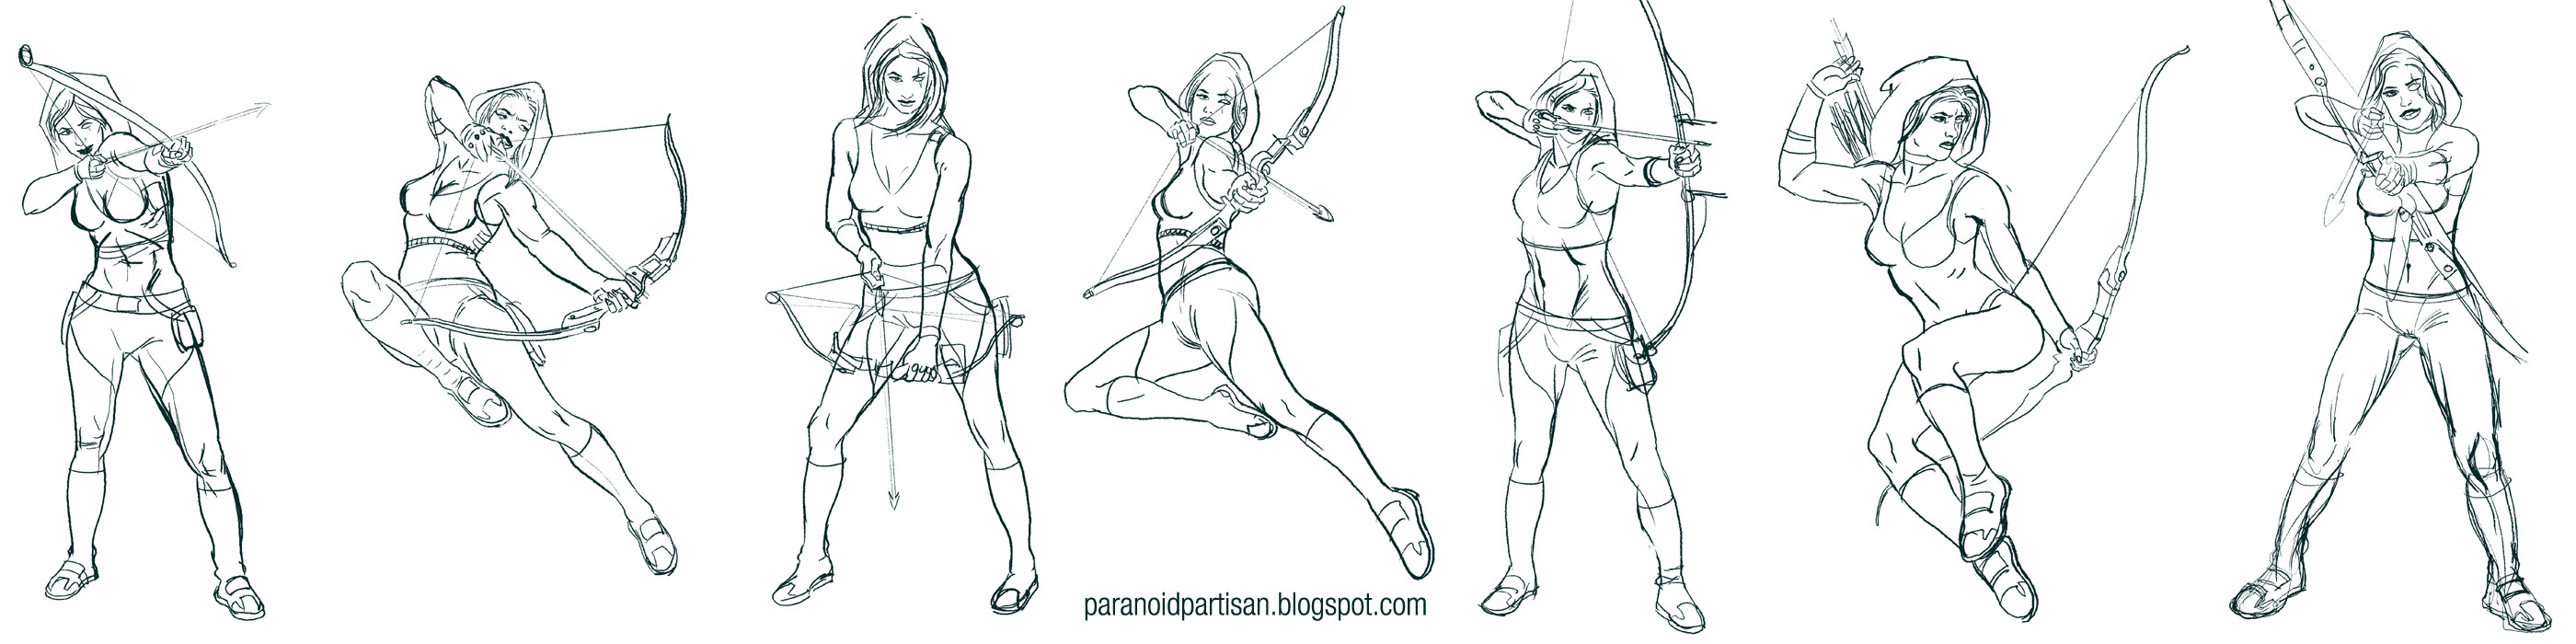 First sketches, looking for the right pose.